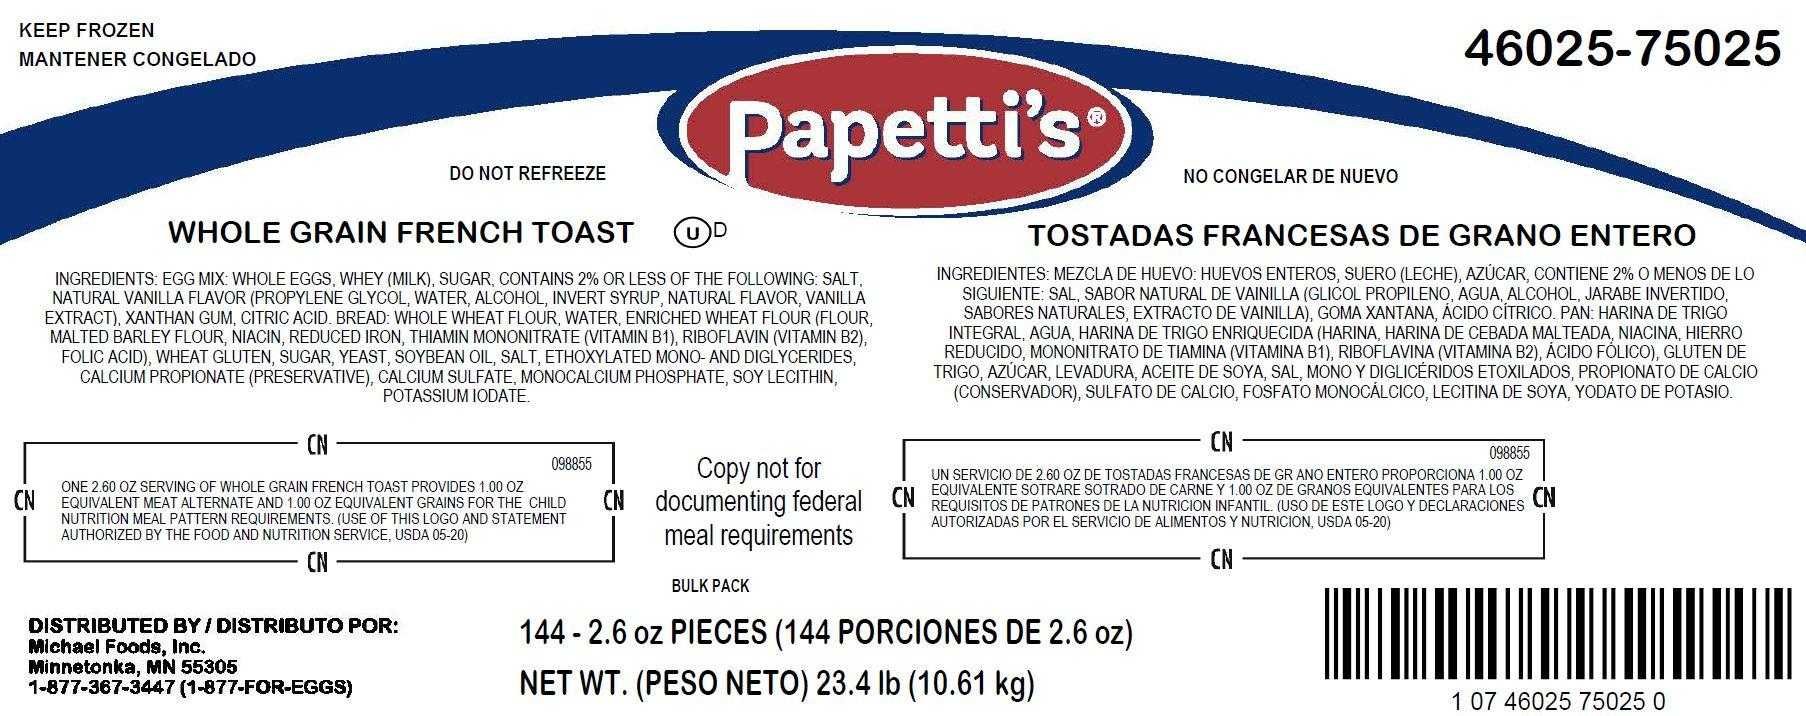 Papetti’s® Fully-Cooked Whole Grain French Toast, CN, 144/2.6 oz CN Labeled PDF